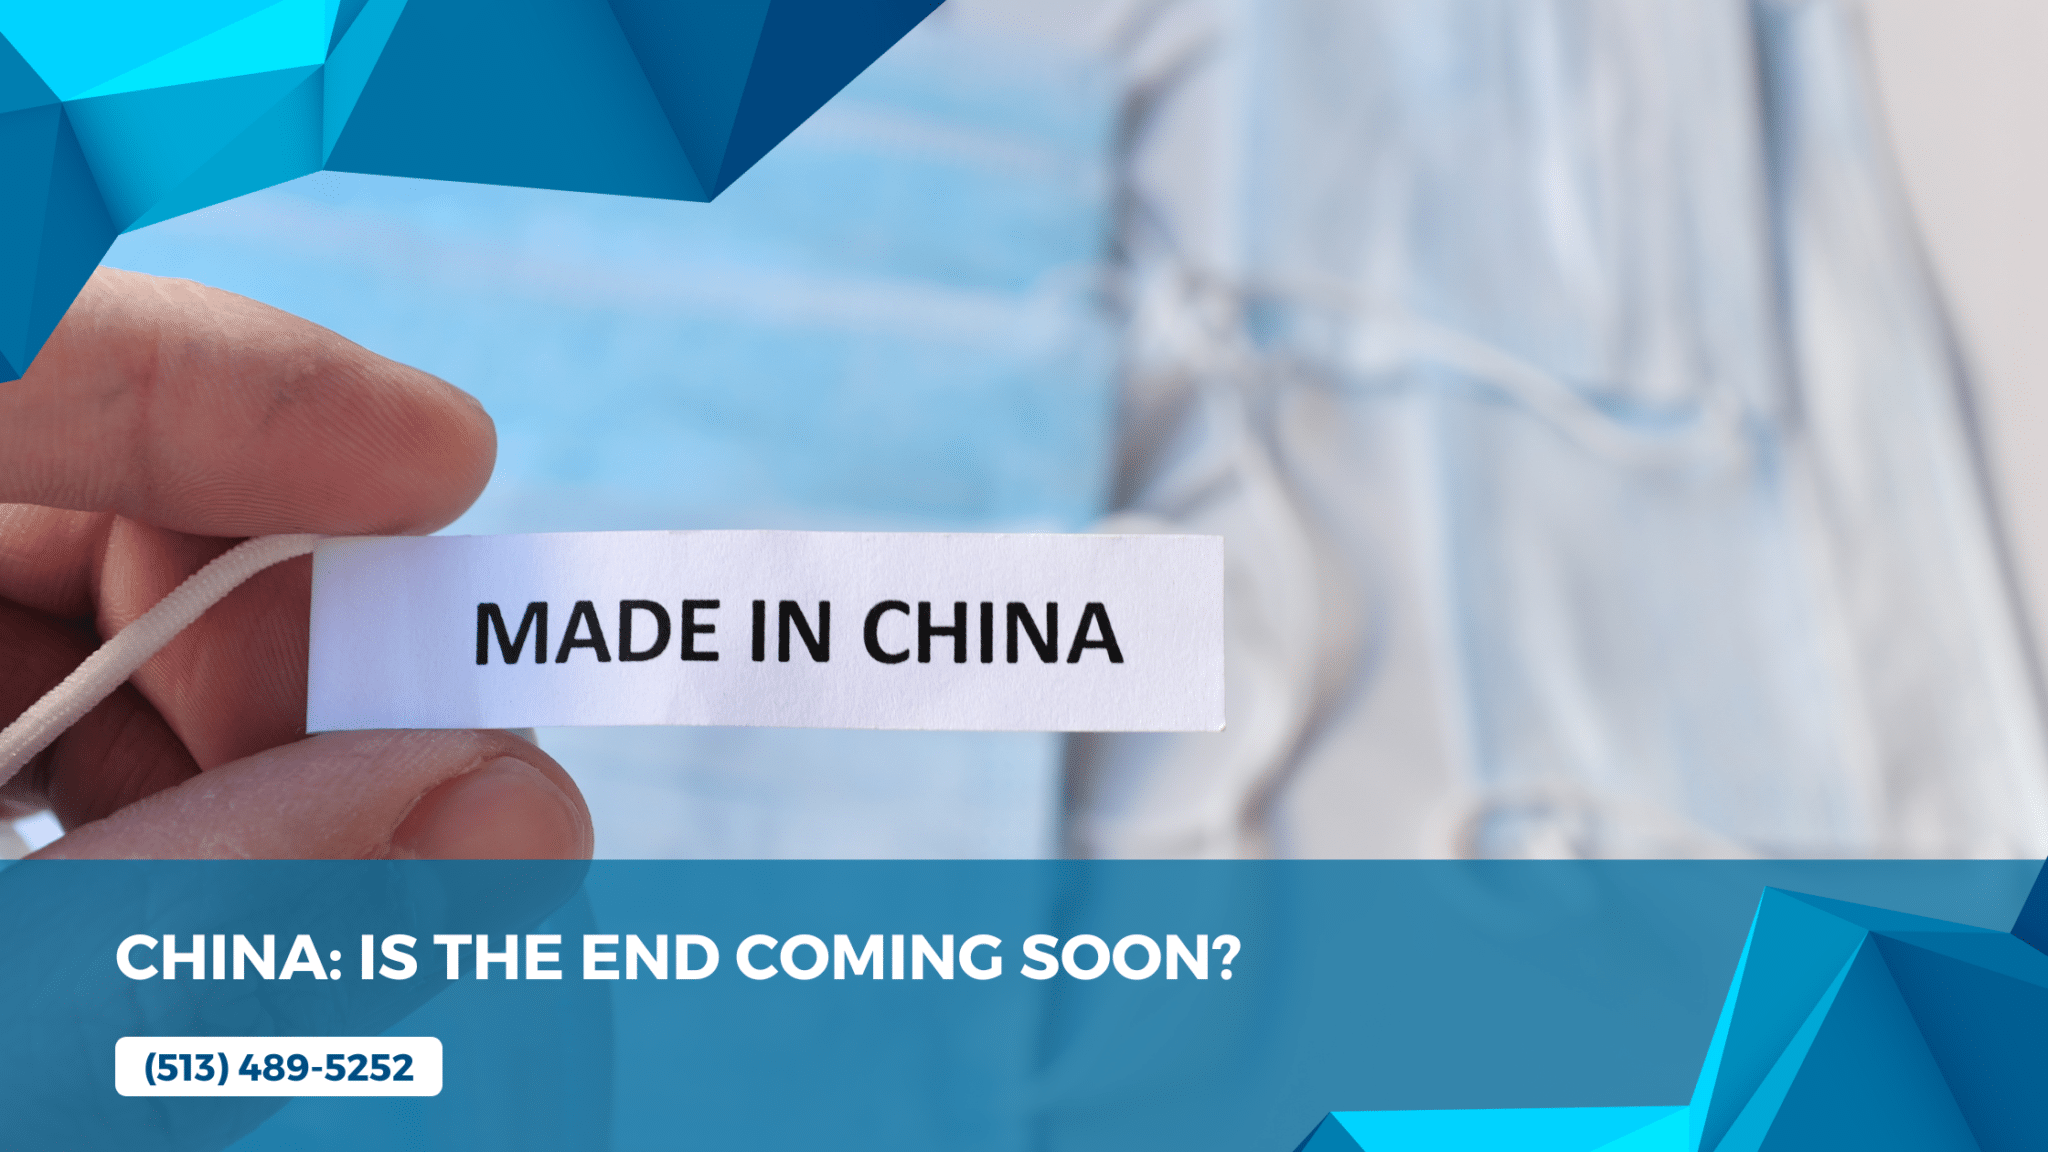 China: Is the End Coming Soon?